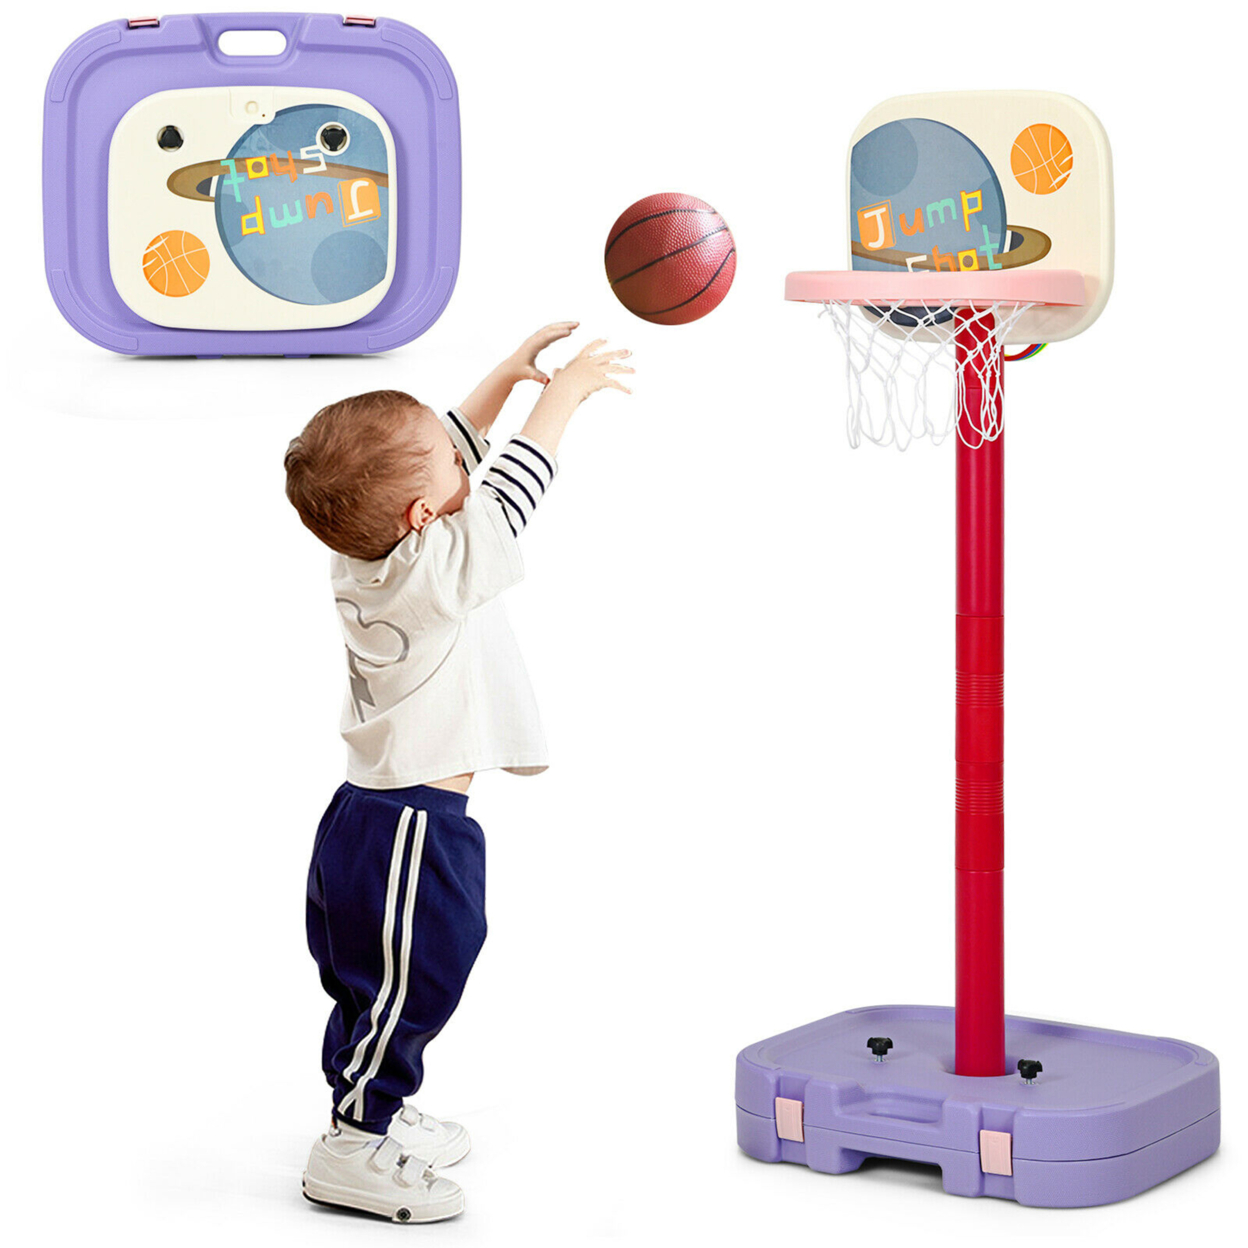 Portable 2 In 1 Kids Basketball Hoop Stand W/ Ring Toss & Storage Box - Purple